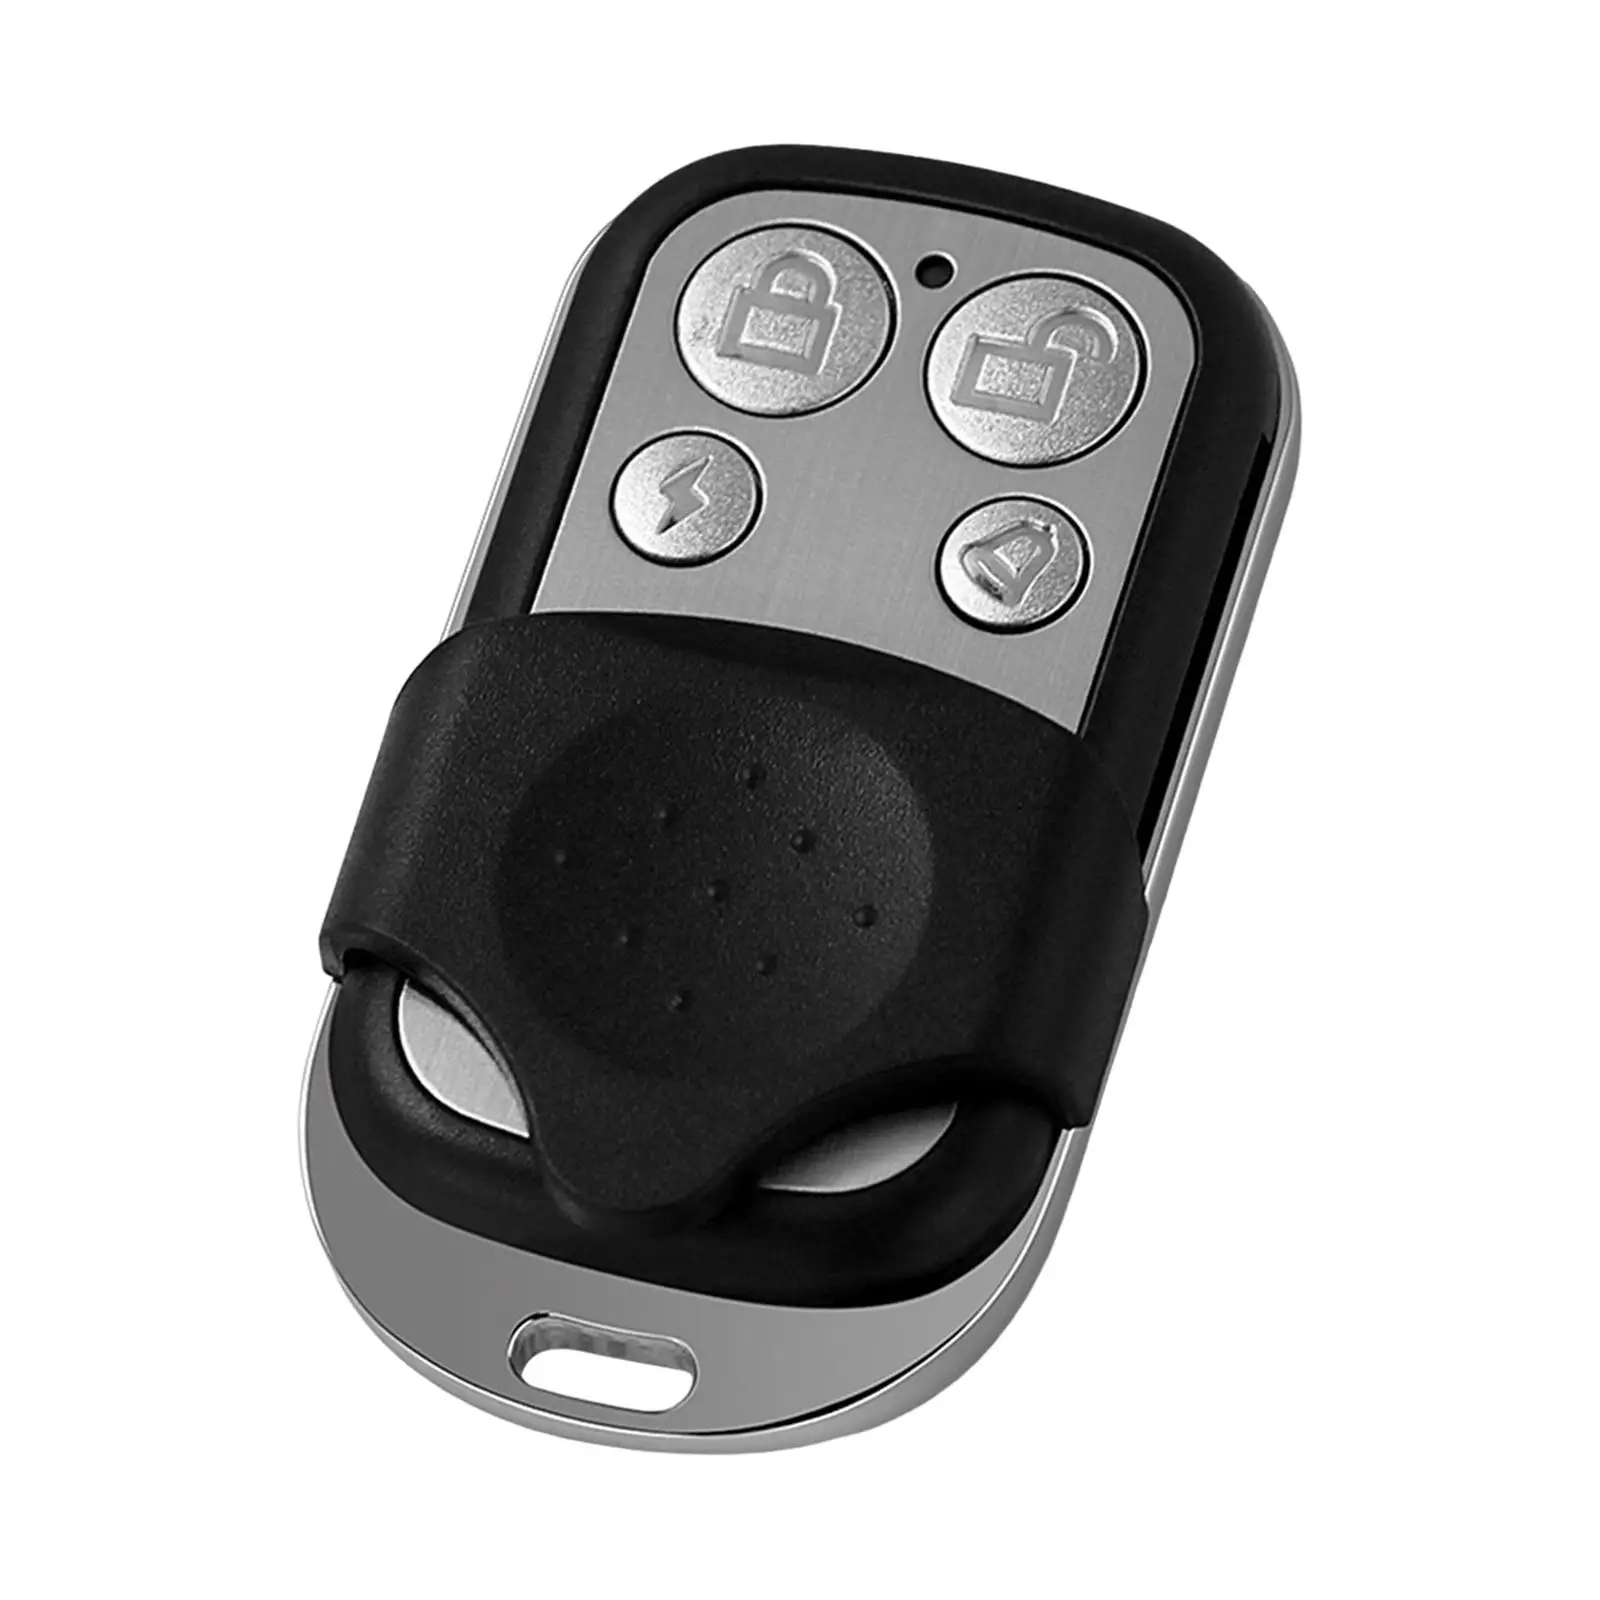 Electric Gate Garage Door Remote Control Electric Gate with 4 Buttons Clone Cloning Code Car Key Cloning Remote Control Key